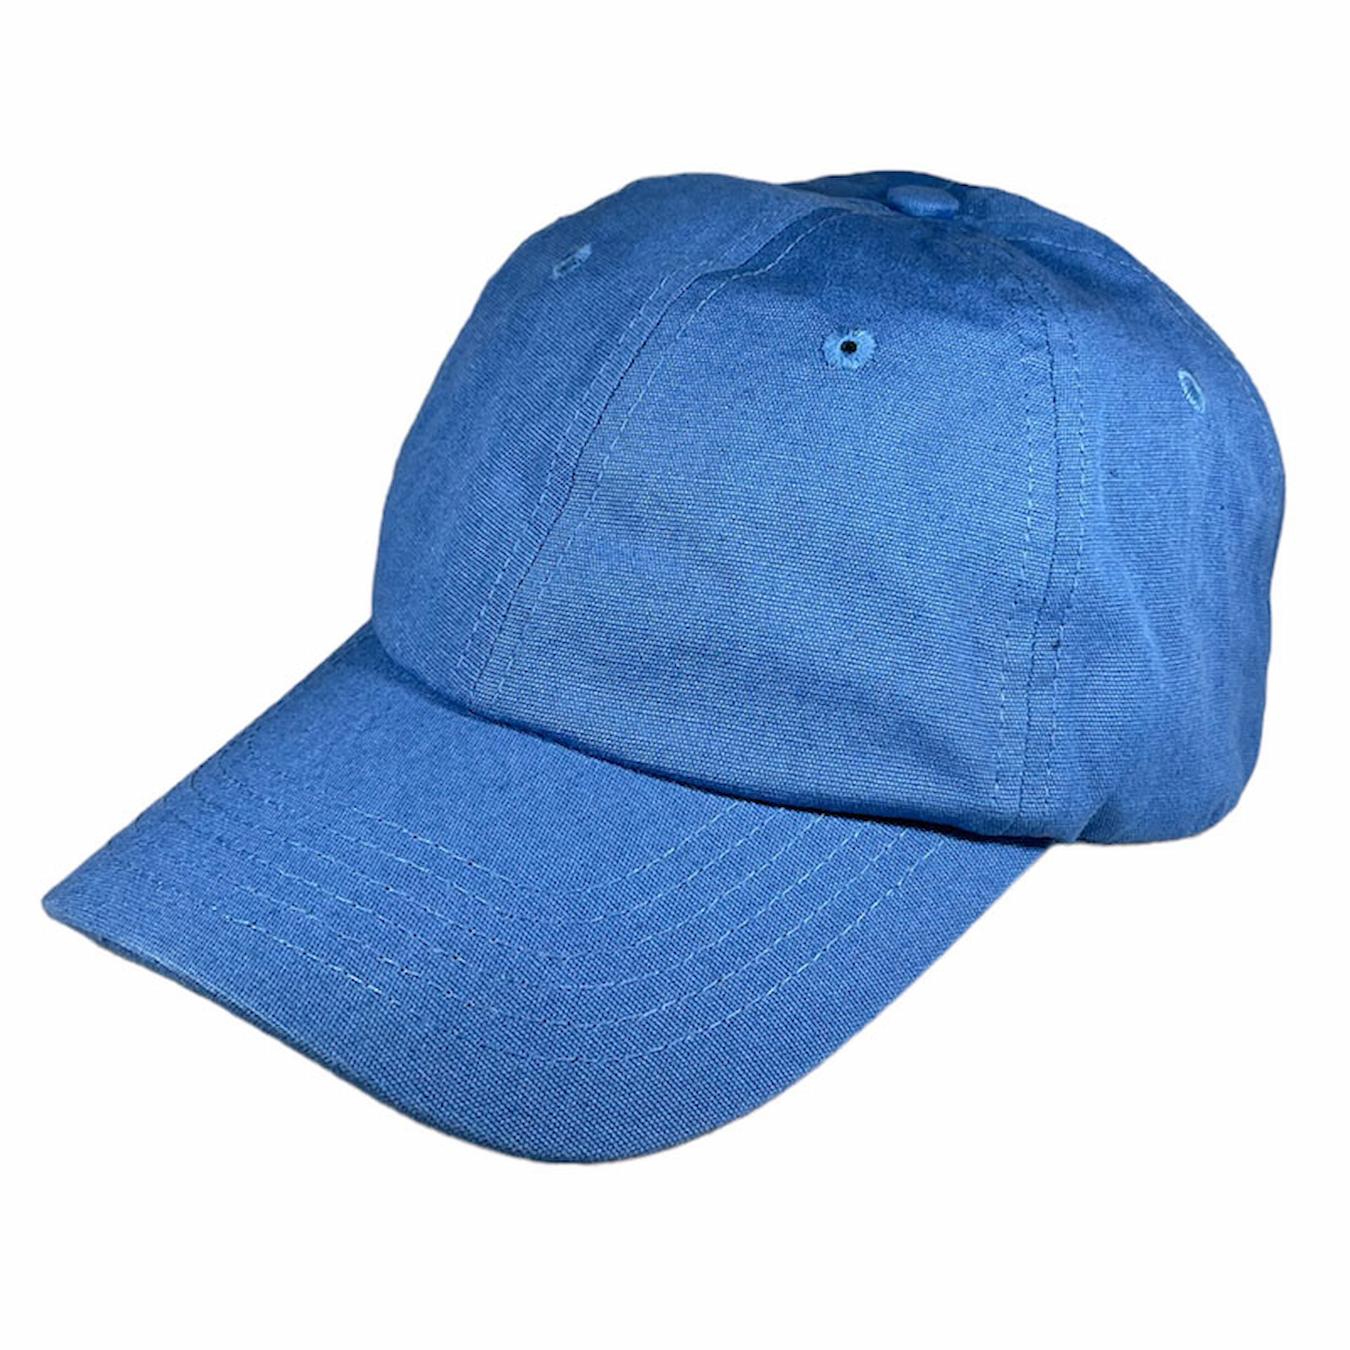 double portion supply blue hipster dad hat employee swag items swag kit positive impression office supplies team spirit recycled materials phone wallet great swag